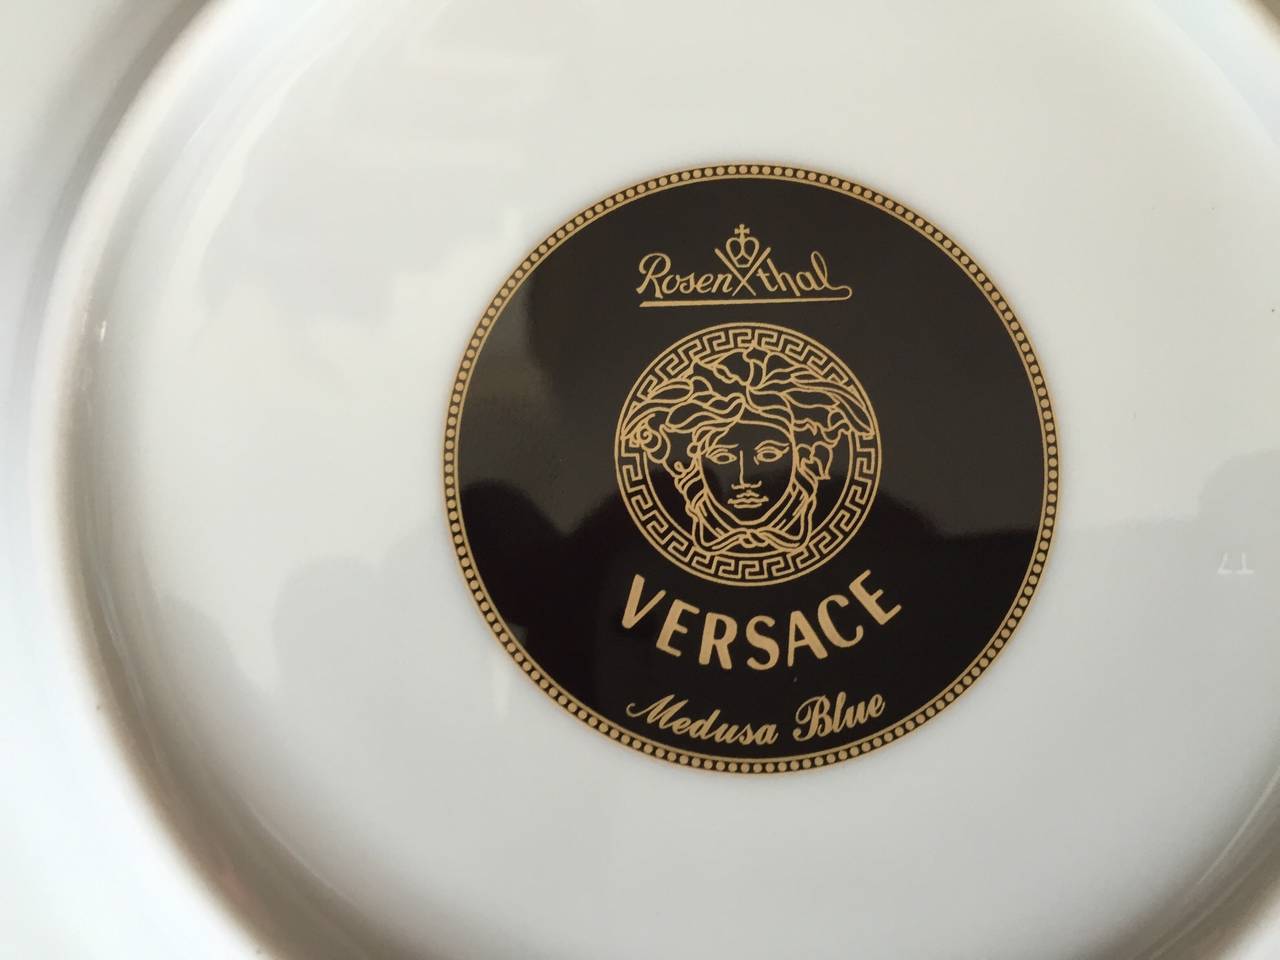 Brand New Vintage Gianni Versace China Salad / Appetizer Plates ( Set of 6 ) 1